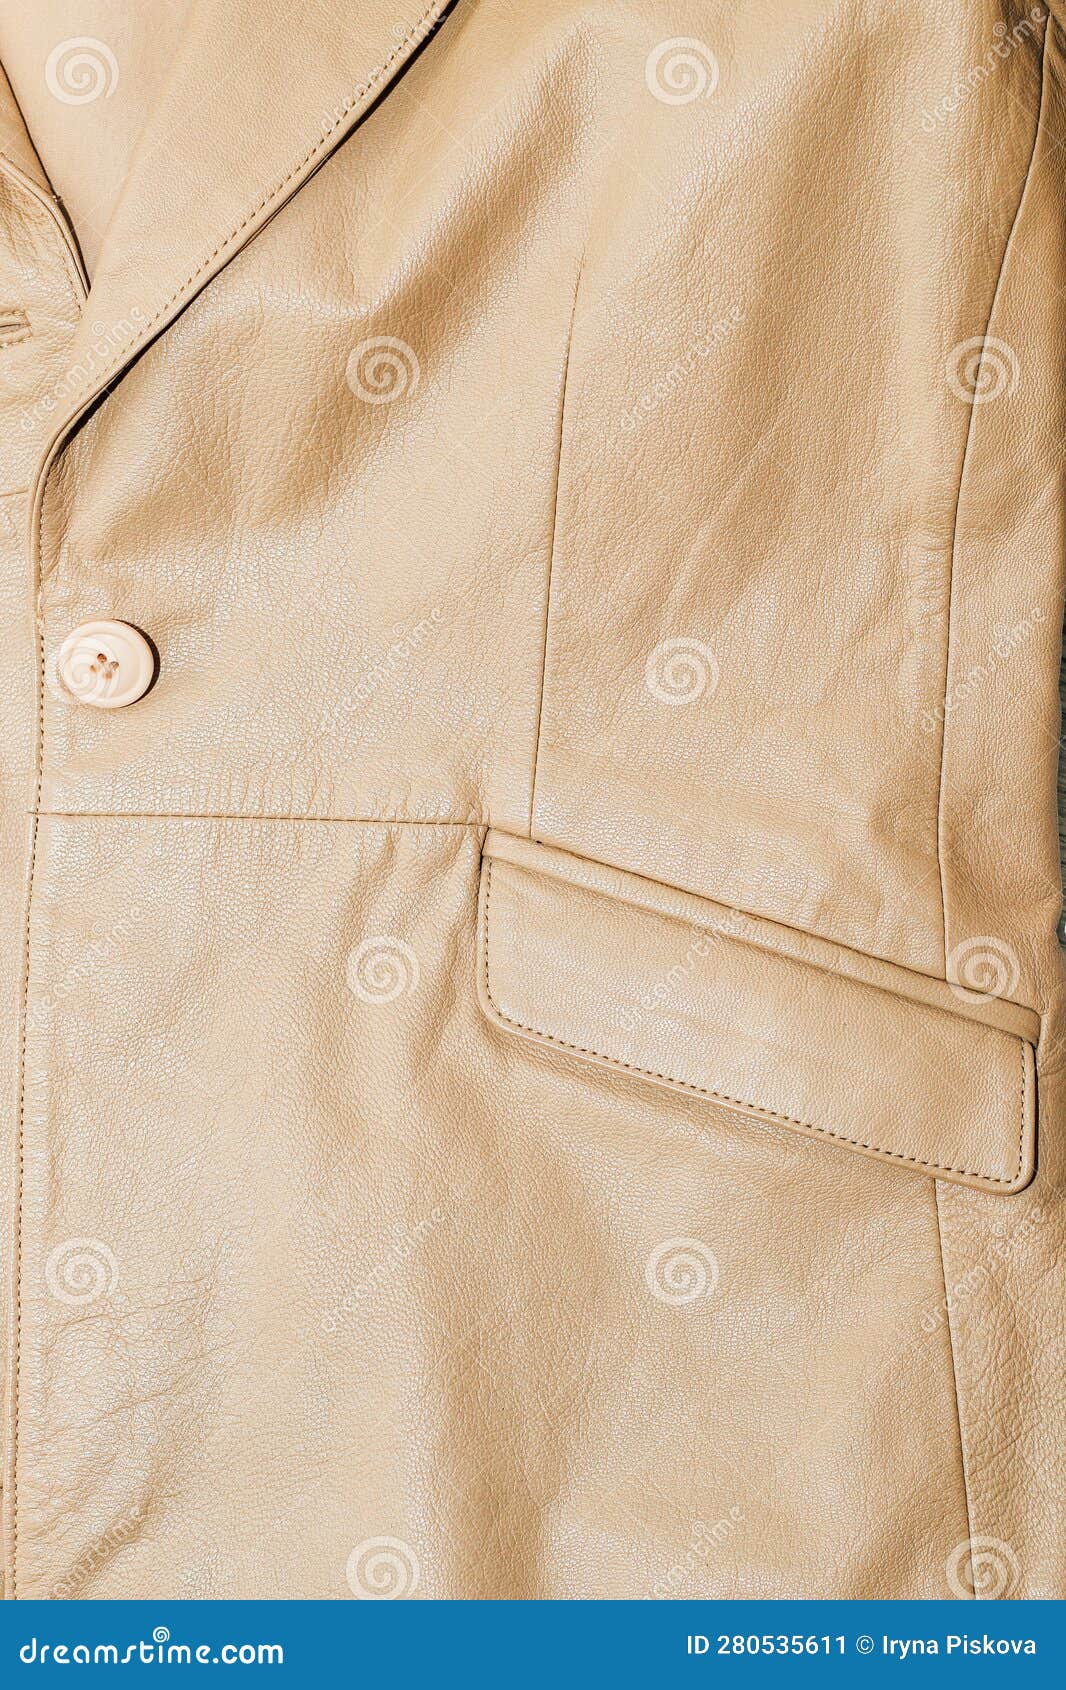 Brown Leather Jacket Texture, Genuine Soft Leather. Stock Image - Image ...